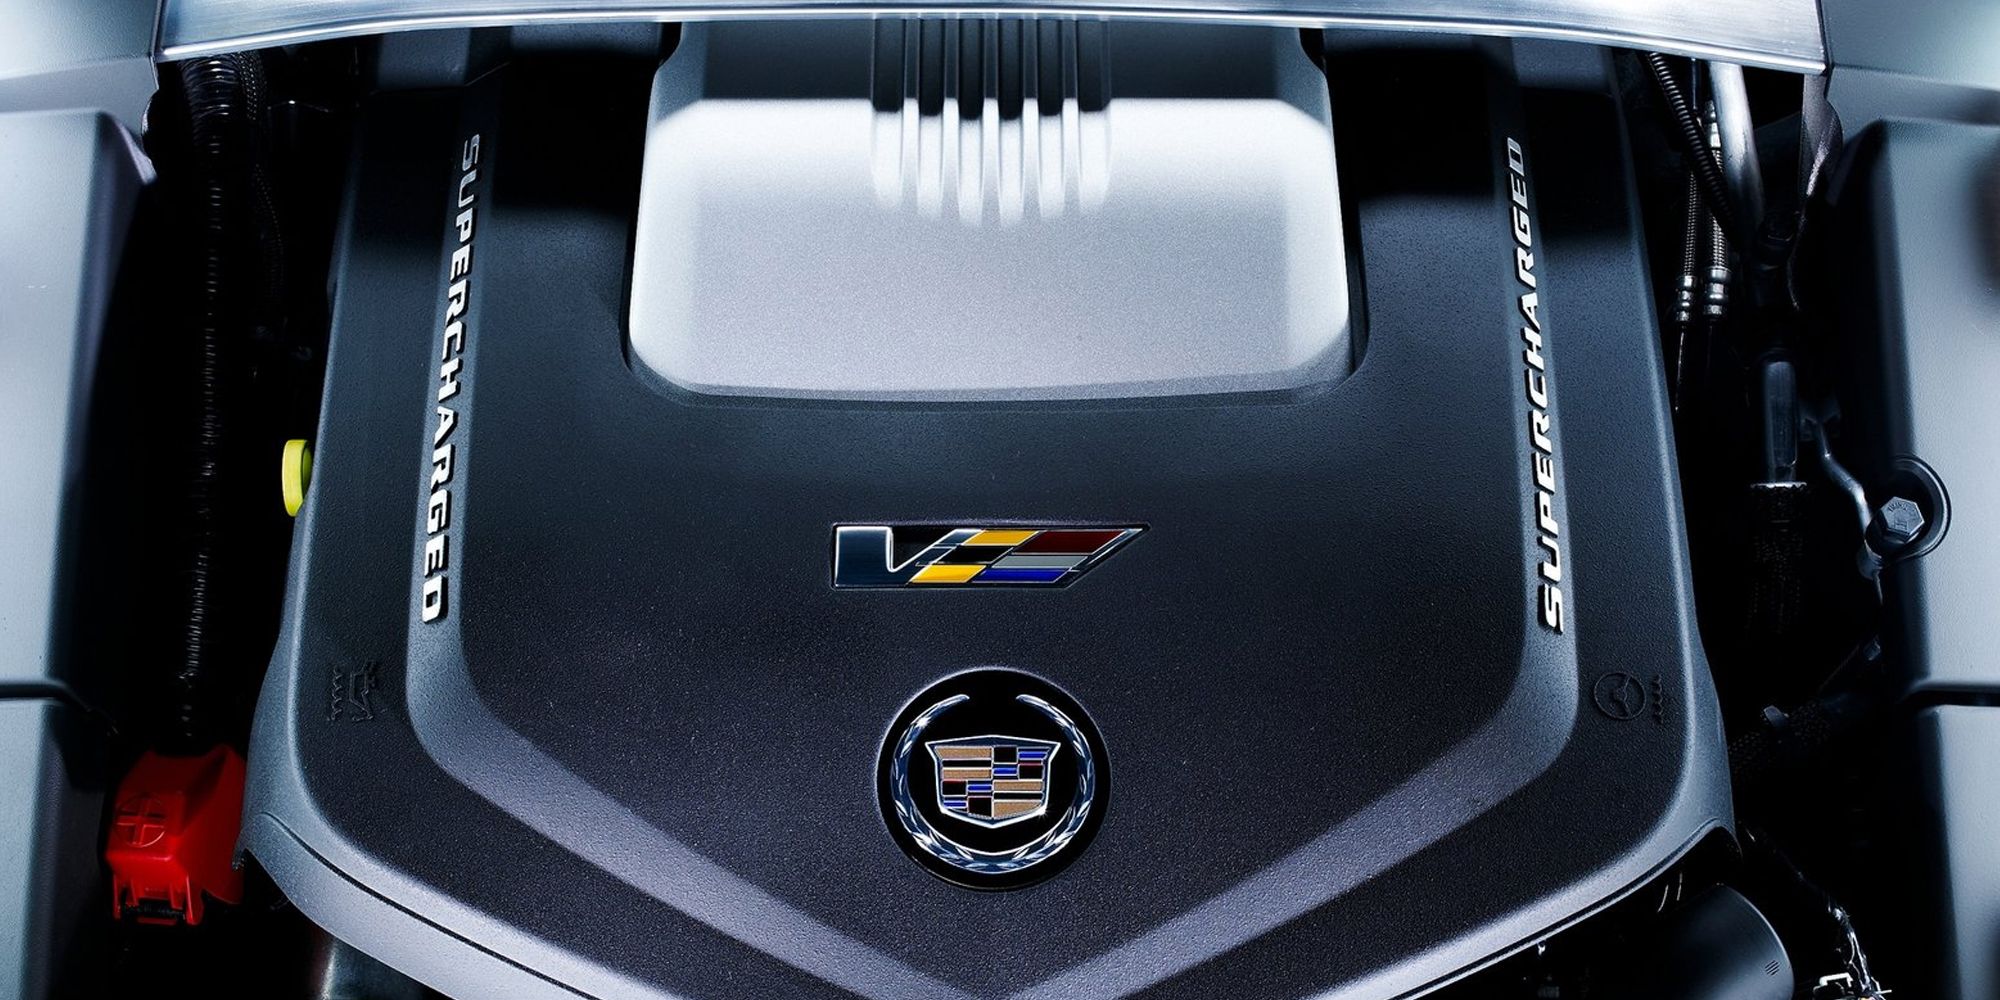 The plastic engine cover in the CTS-V